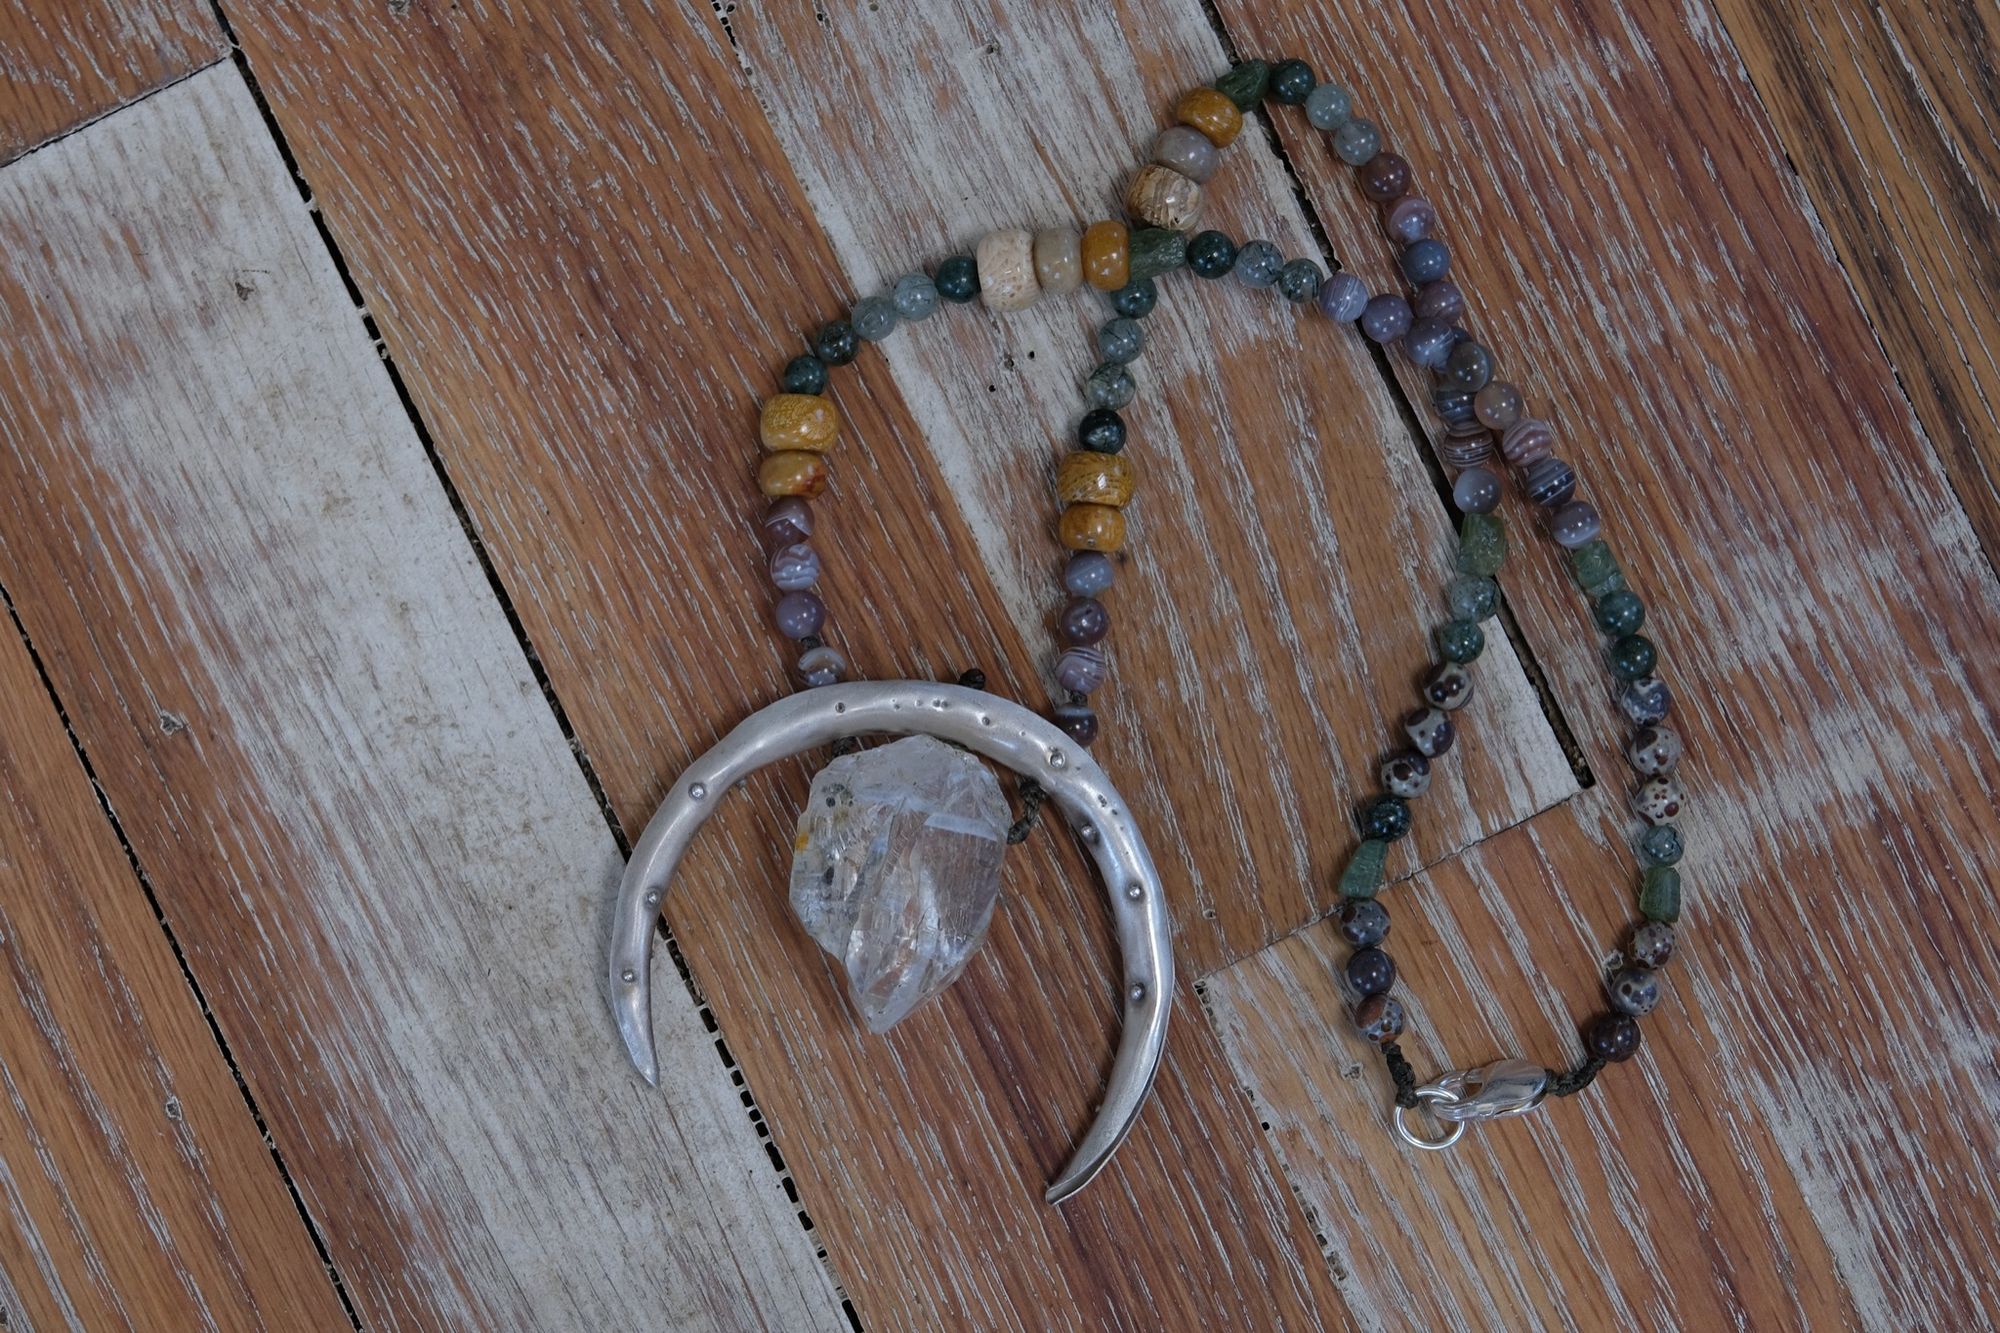 A necklace made of a silver moon, clear quartz crystal, earth-tone and green beads rests on a wood floor